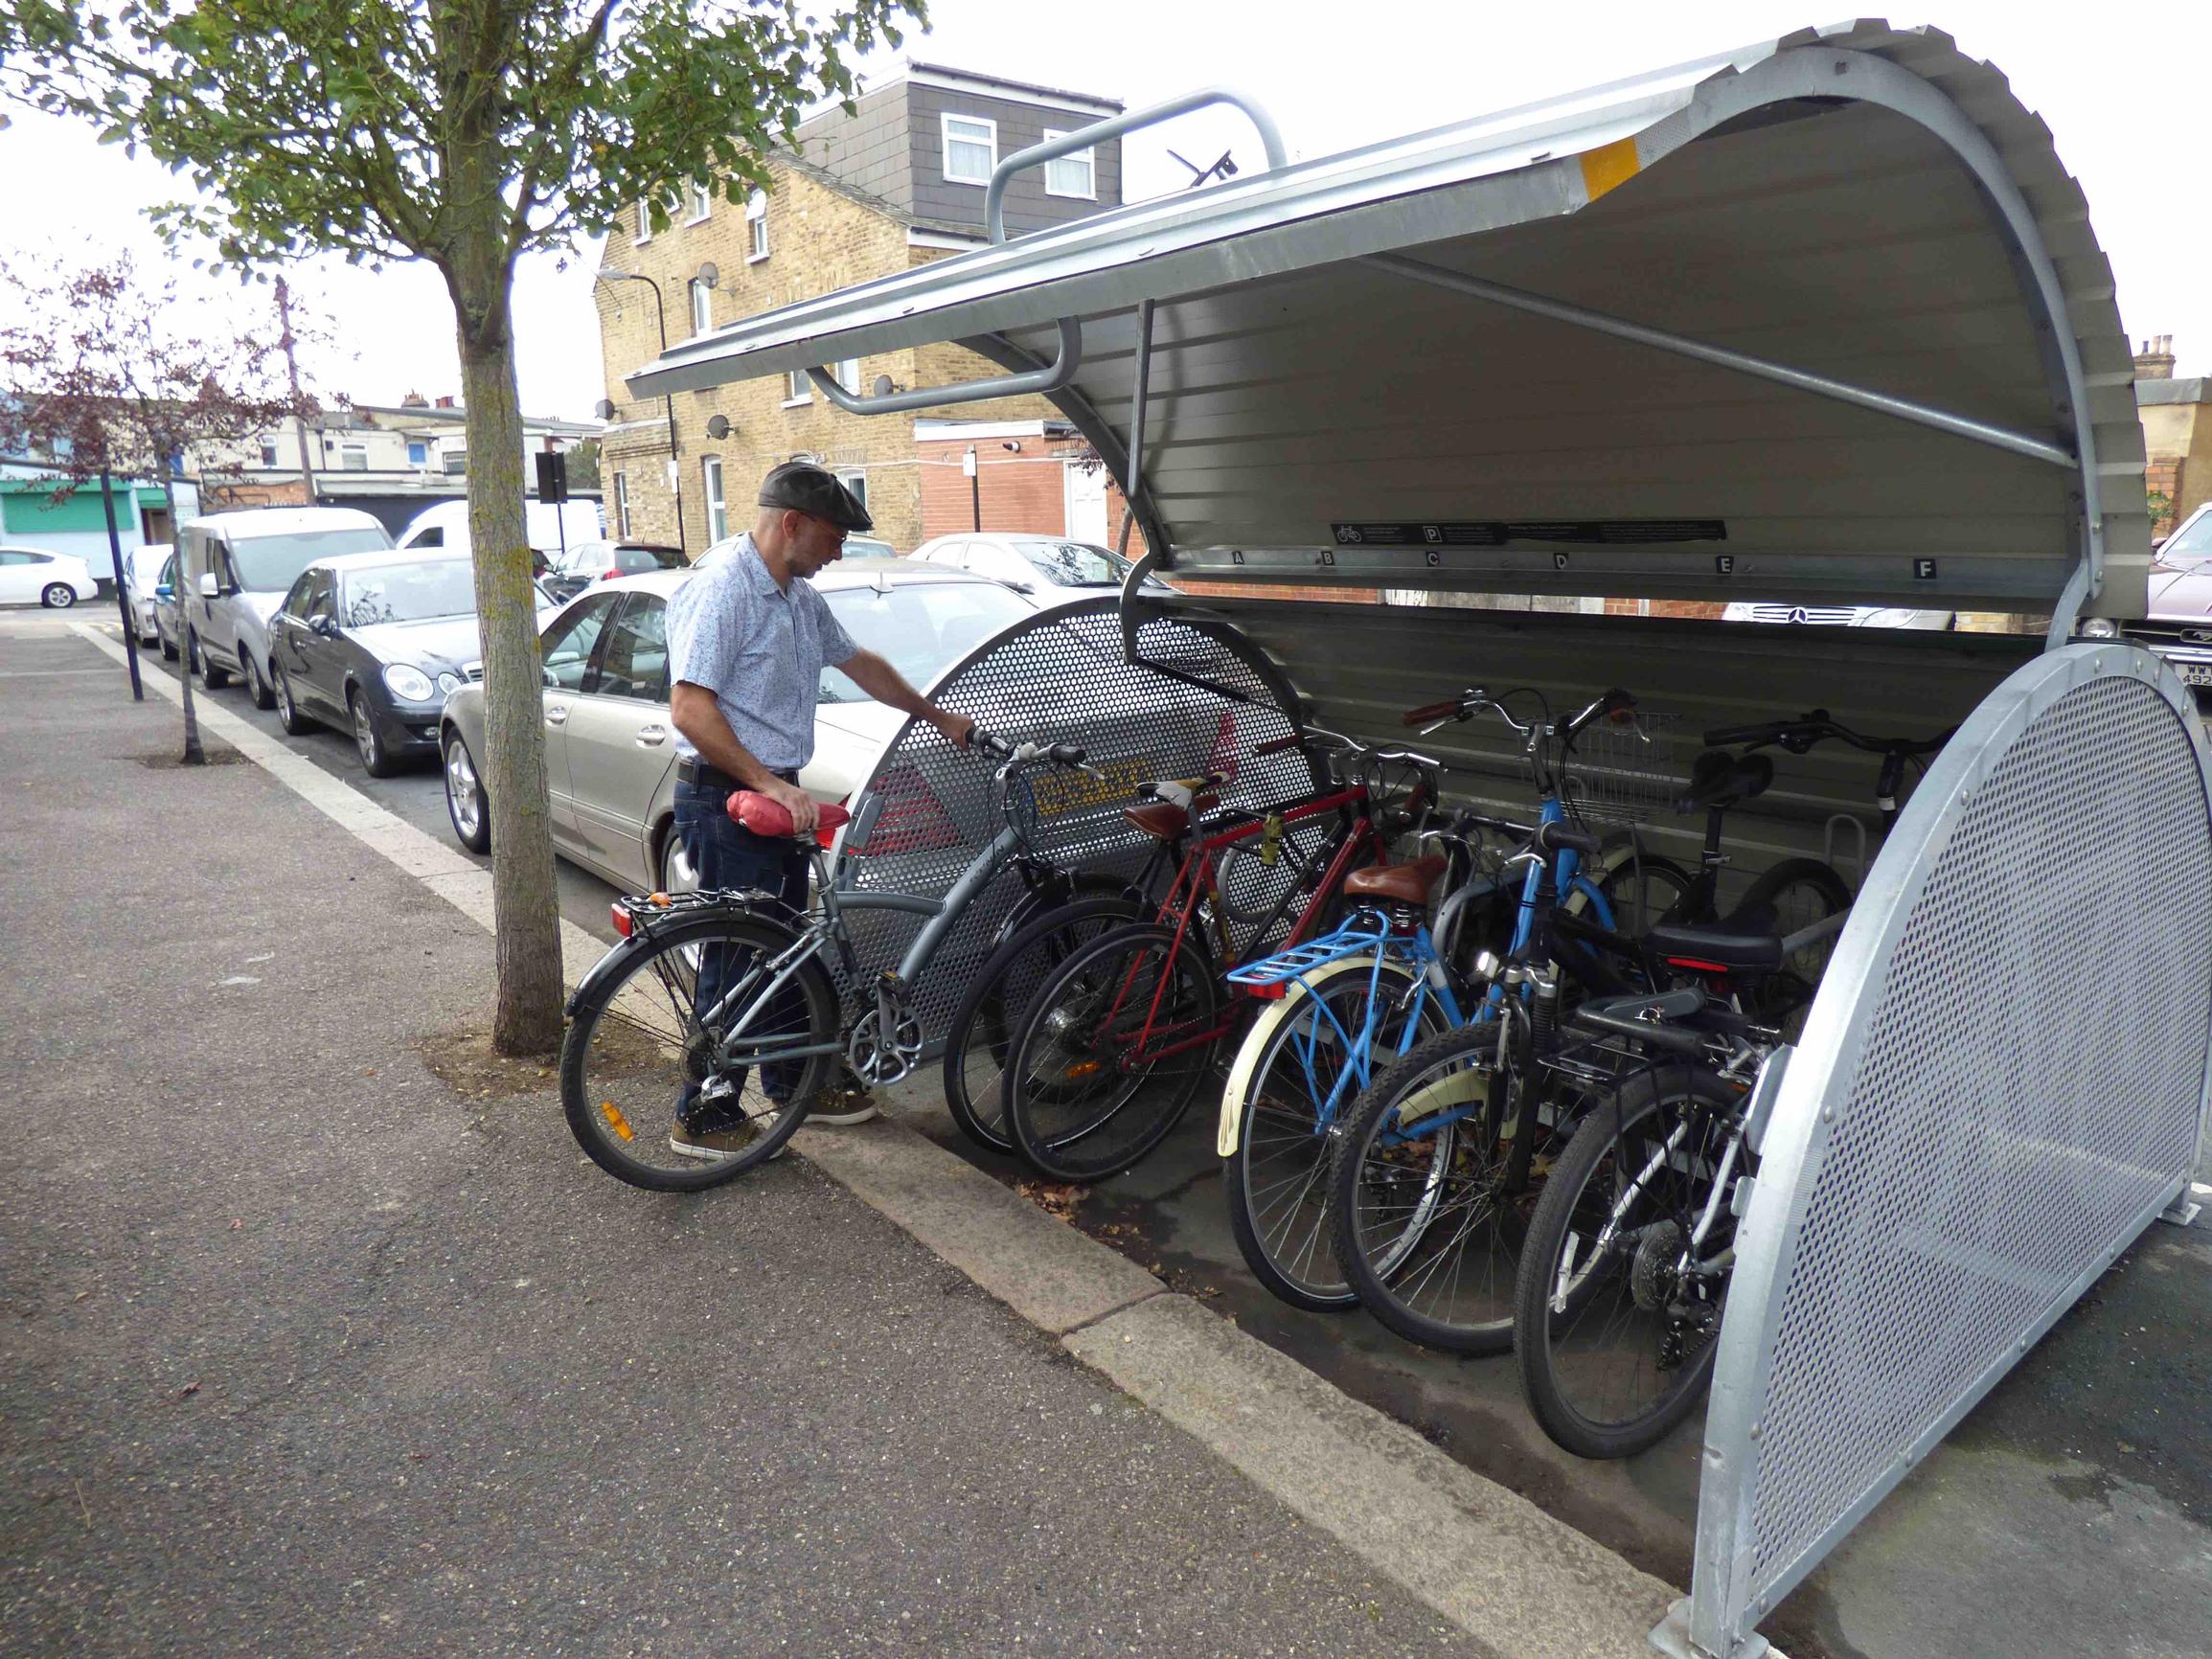 Bikehangars in Waltham Forest have been fitted with `lock shields` to make them more thief resistant. Image: Helen Taylor